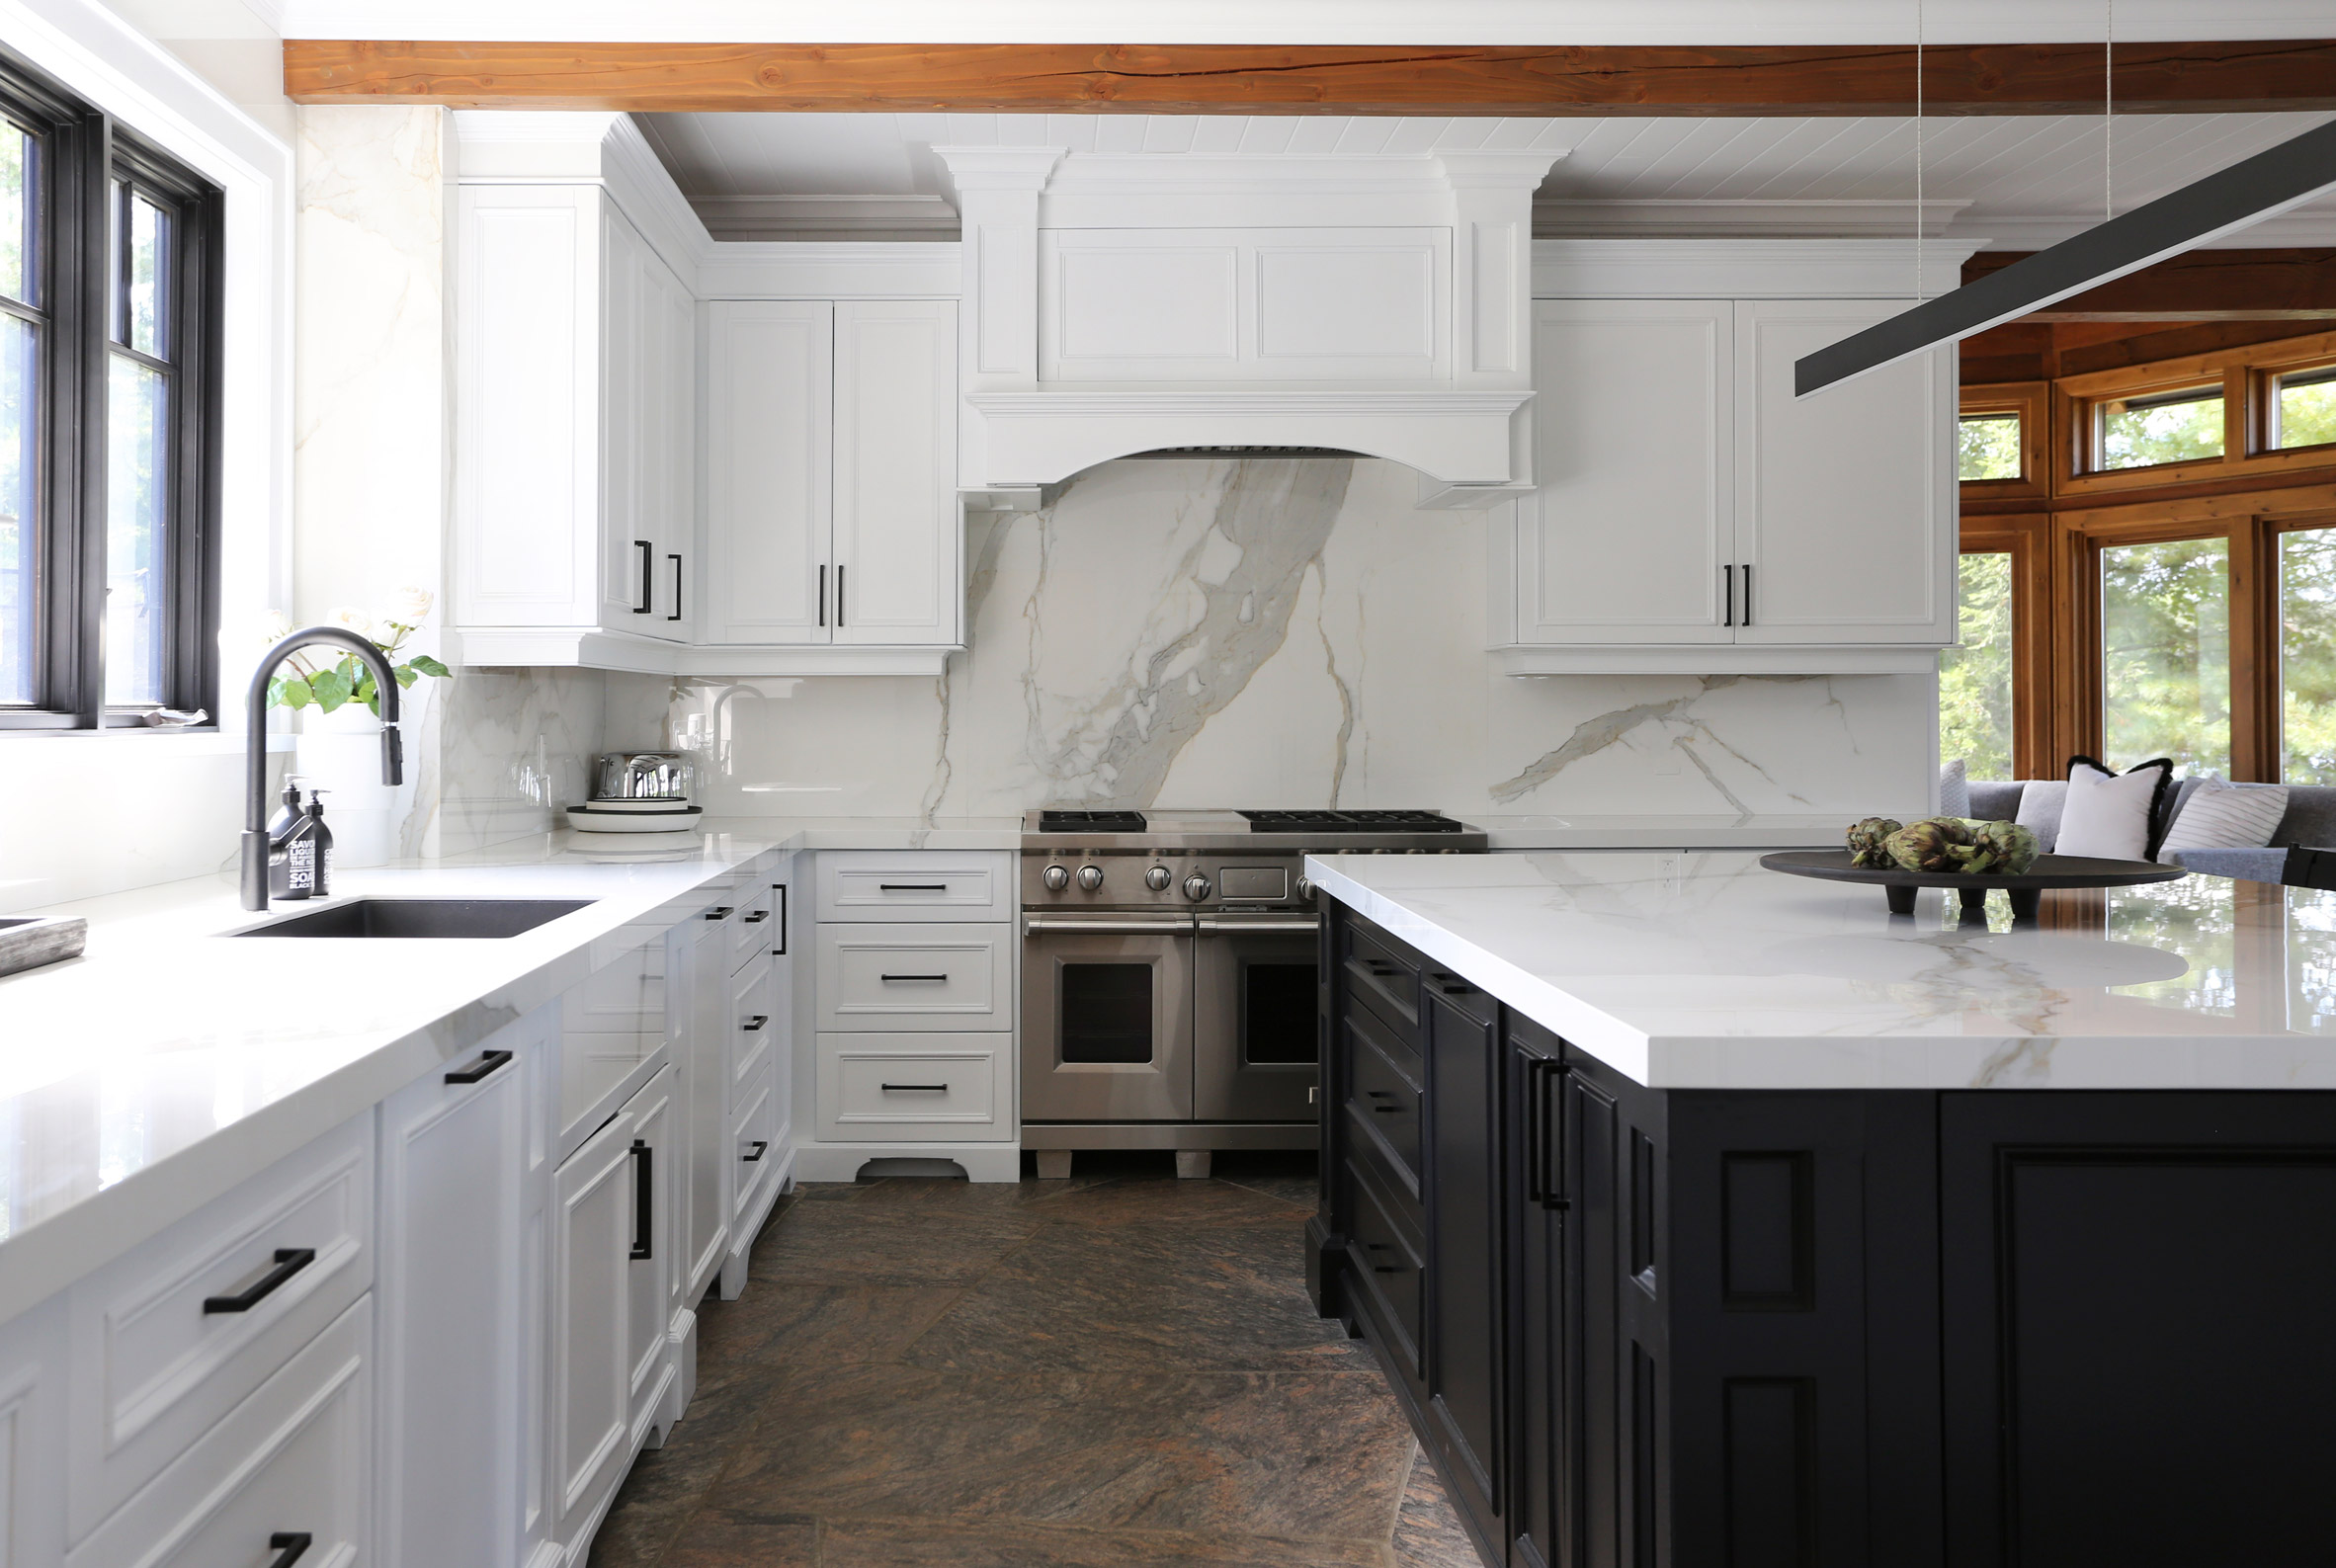 The renovated black and white kitchen